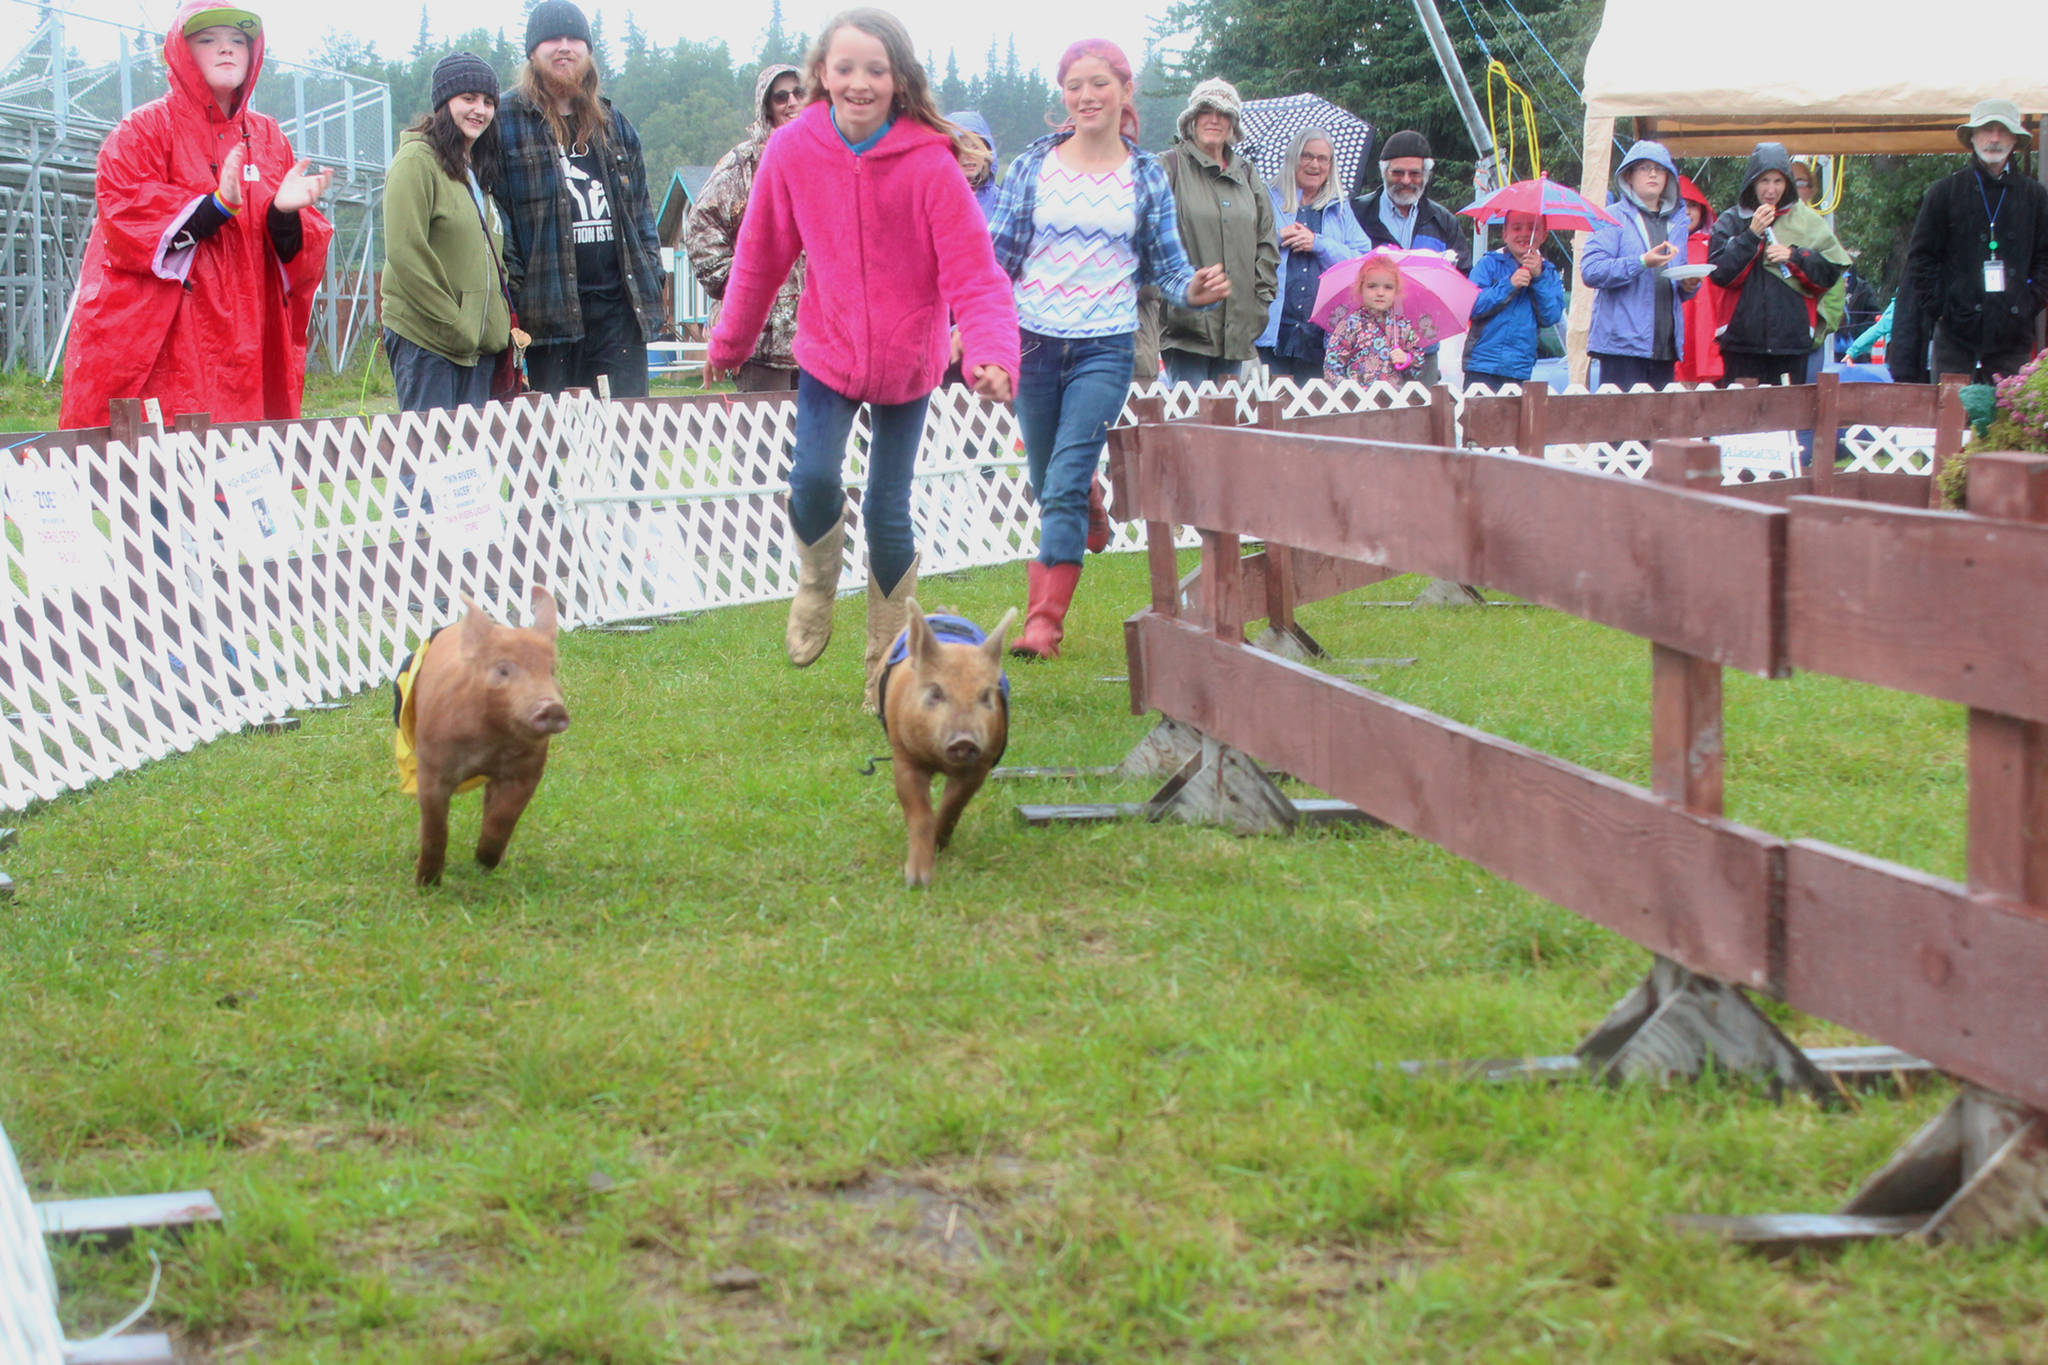 Trinity White, 10, and Alexa Richards, 12, chase pigs down the track during the pig races at the Kenai Peninsula Fair on Friday, Aug. 18, 2017 in Ninilchik, Alaska. Race organizers need volunteer chasers to keep the pigs going in the right direction. (Photo by Megan Pacer/Homer News)